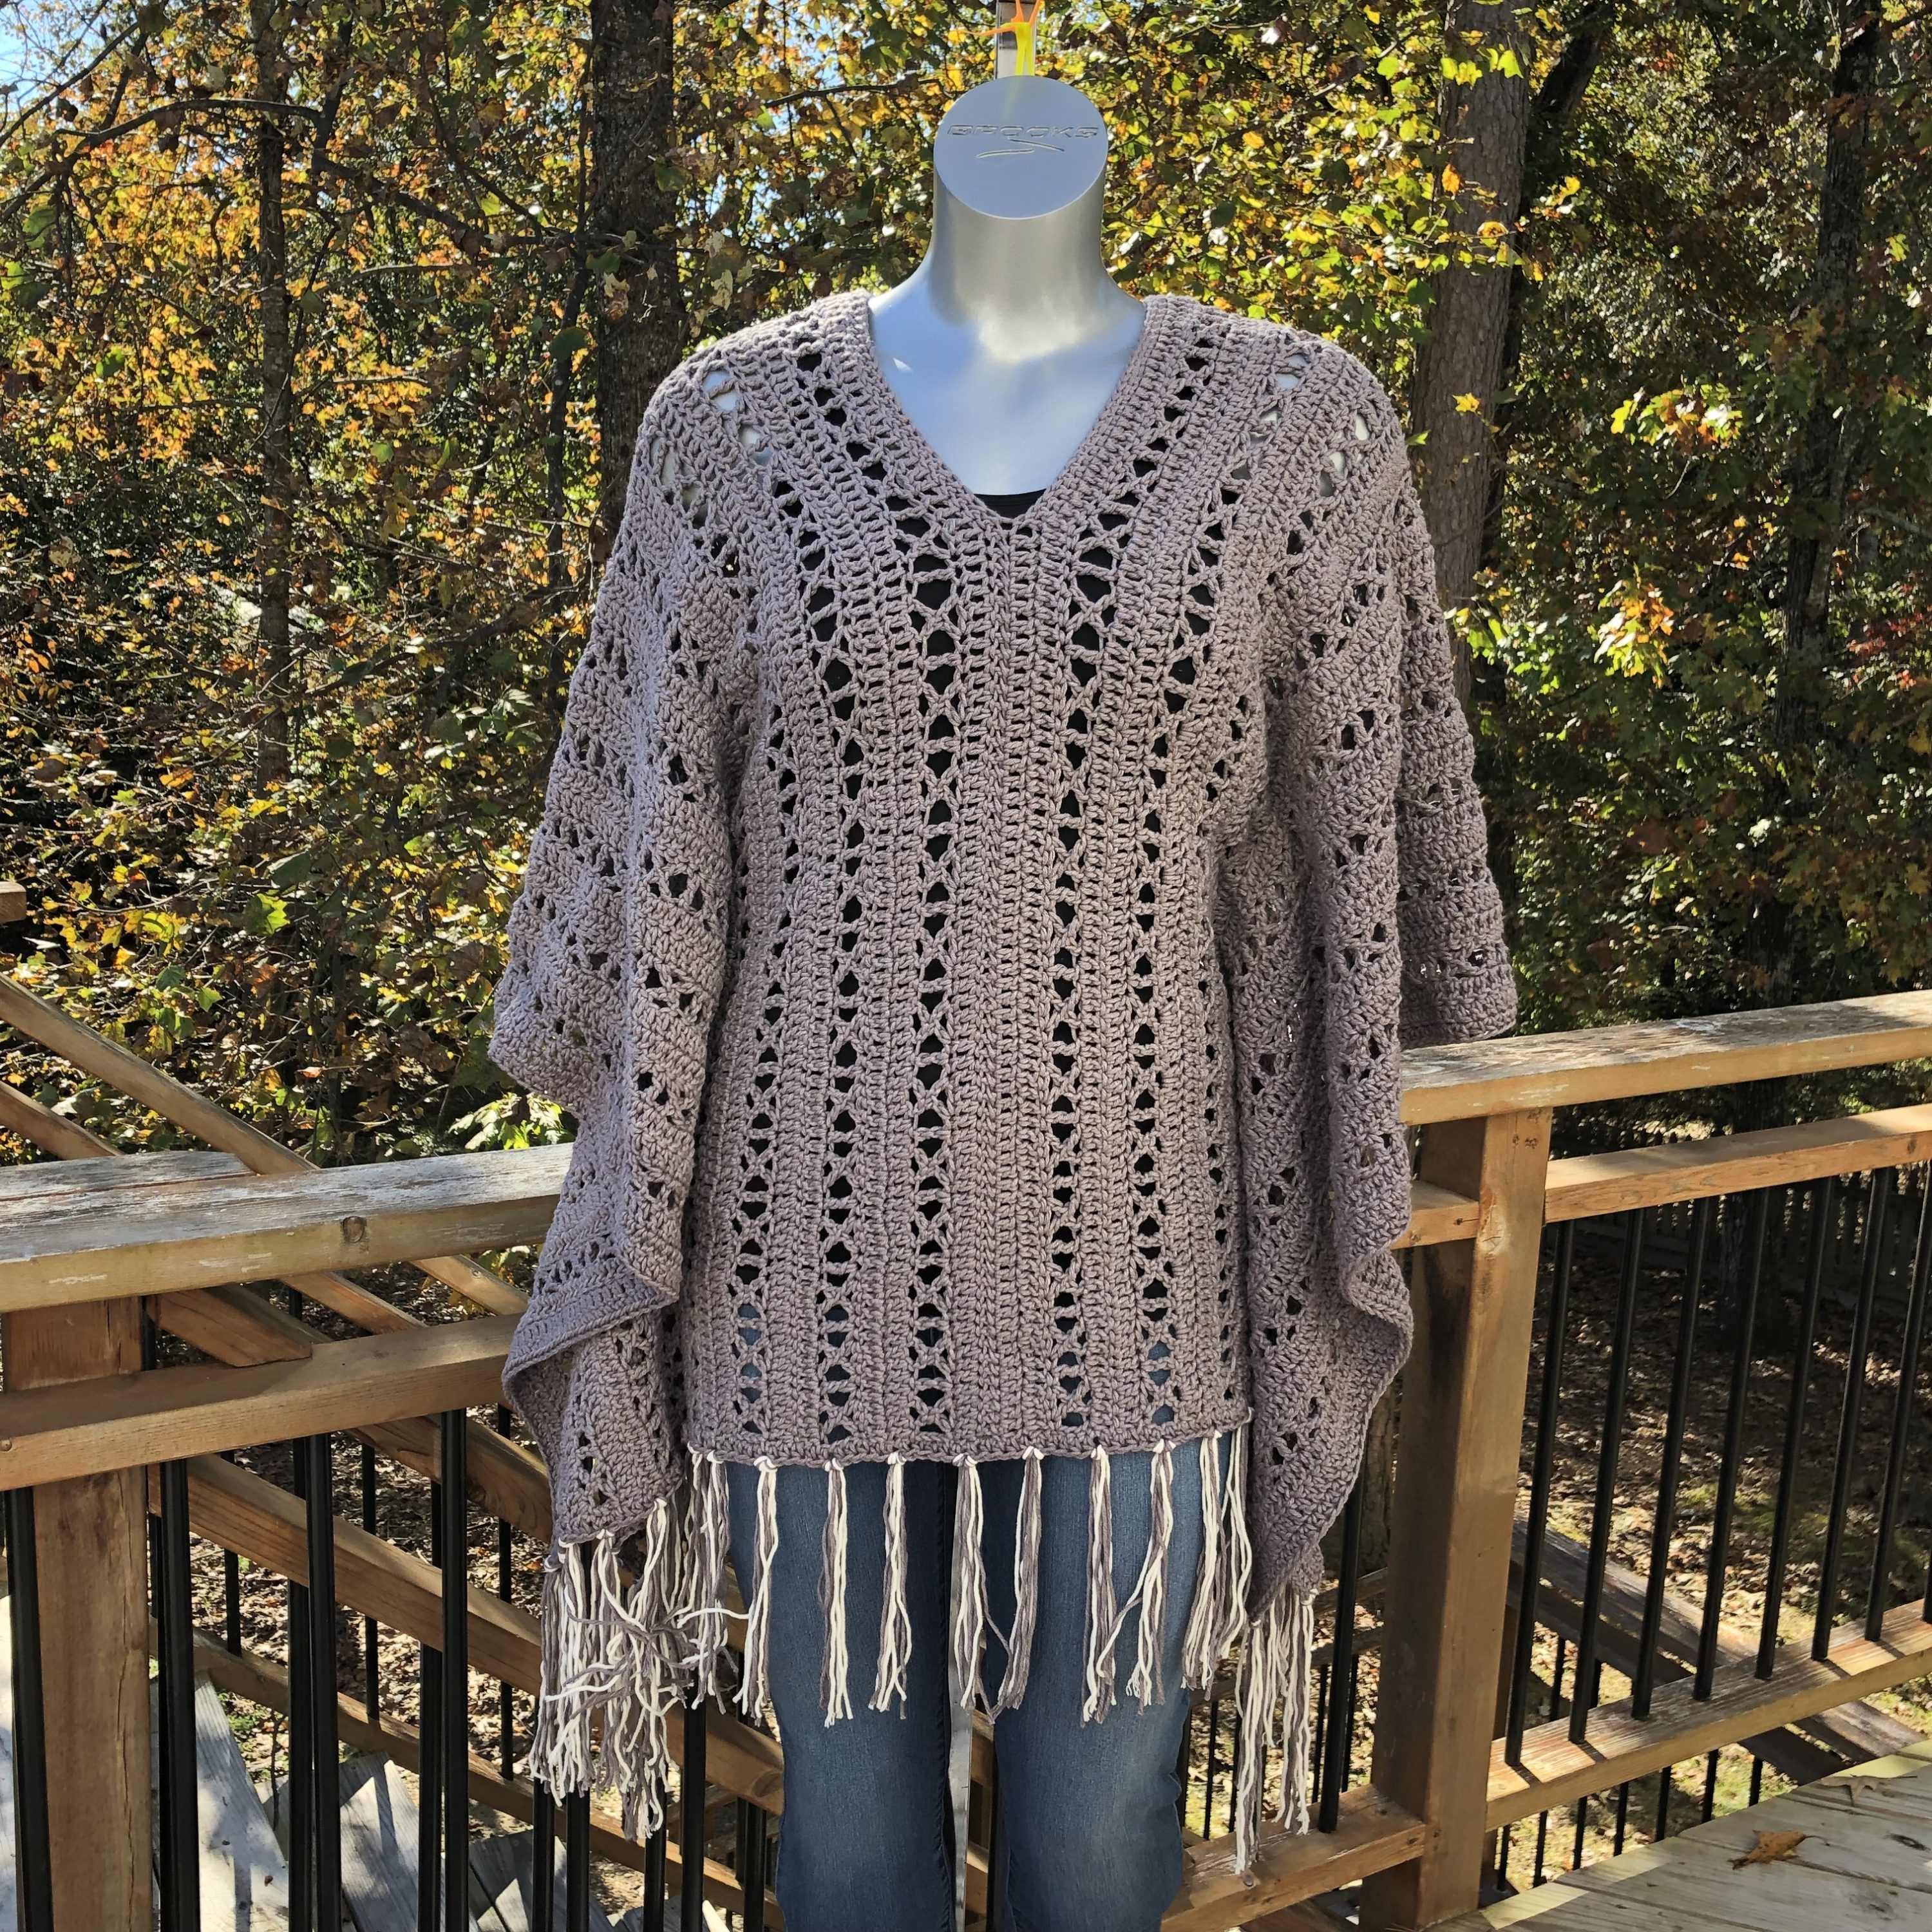 X-capade Poncho, a crochet pattern using worsted weight weight. It'll become your favorite poncho to wear no matter the weather.